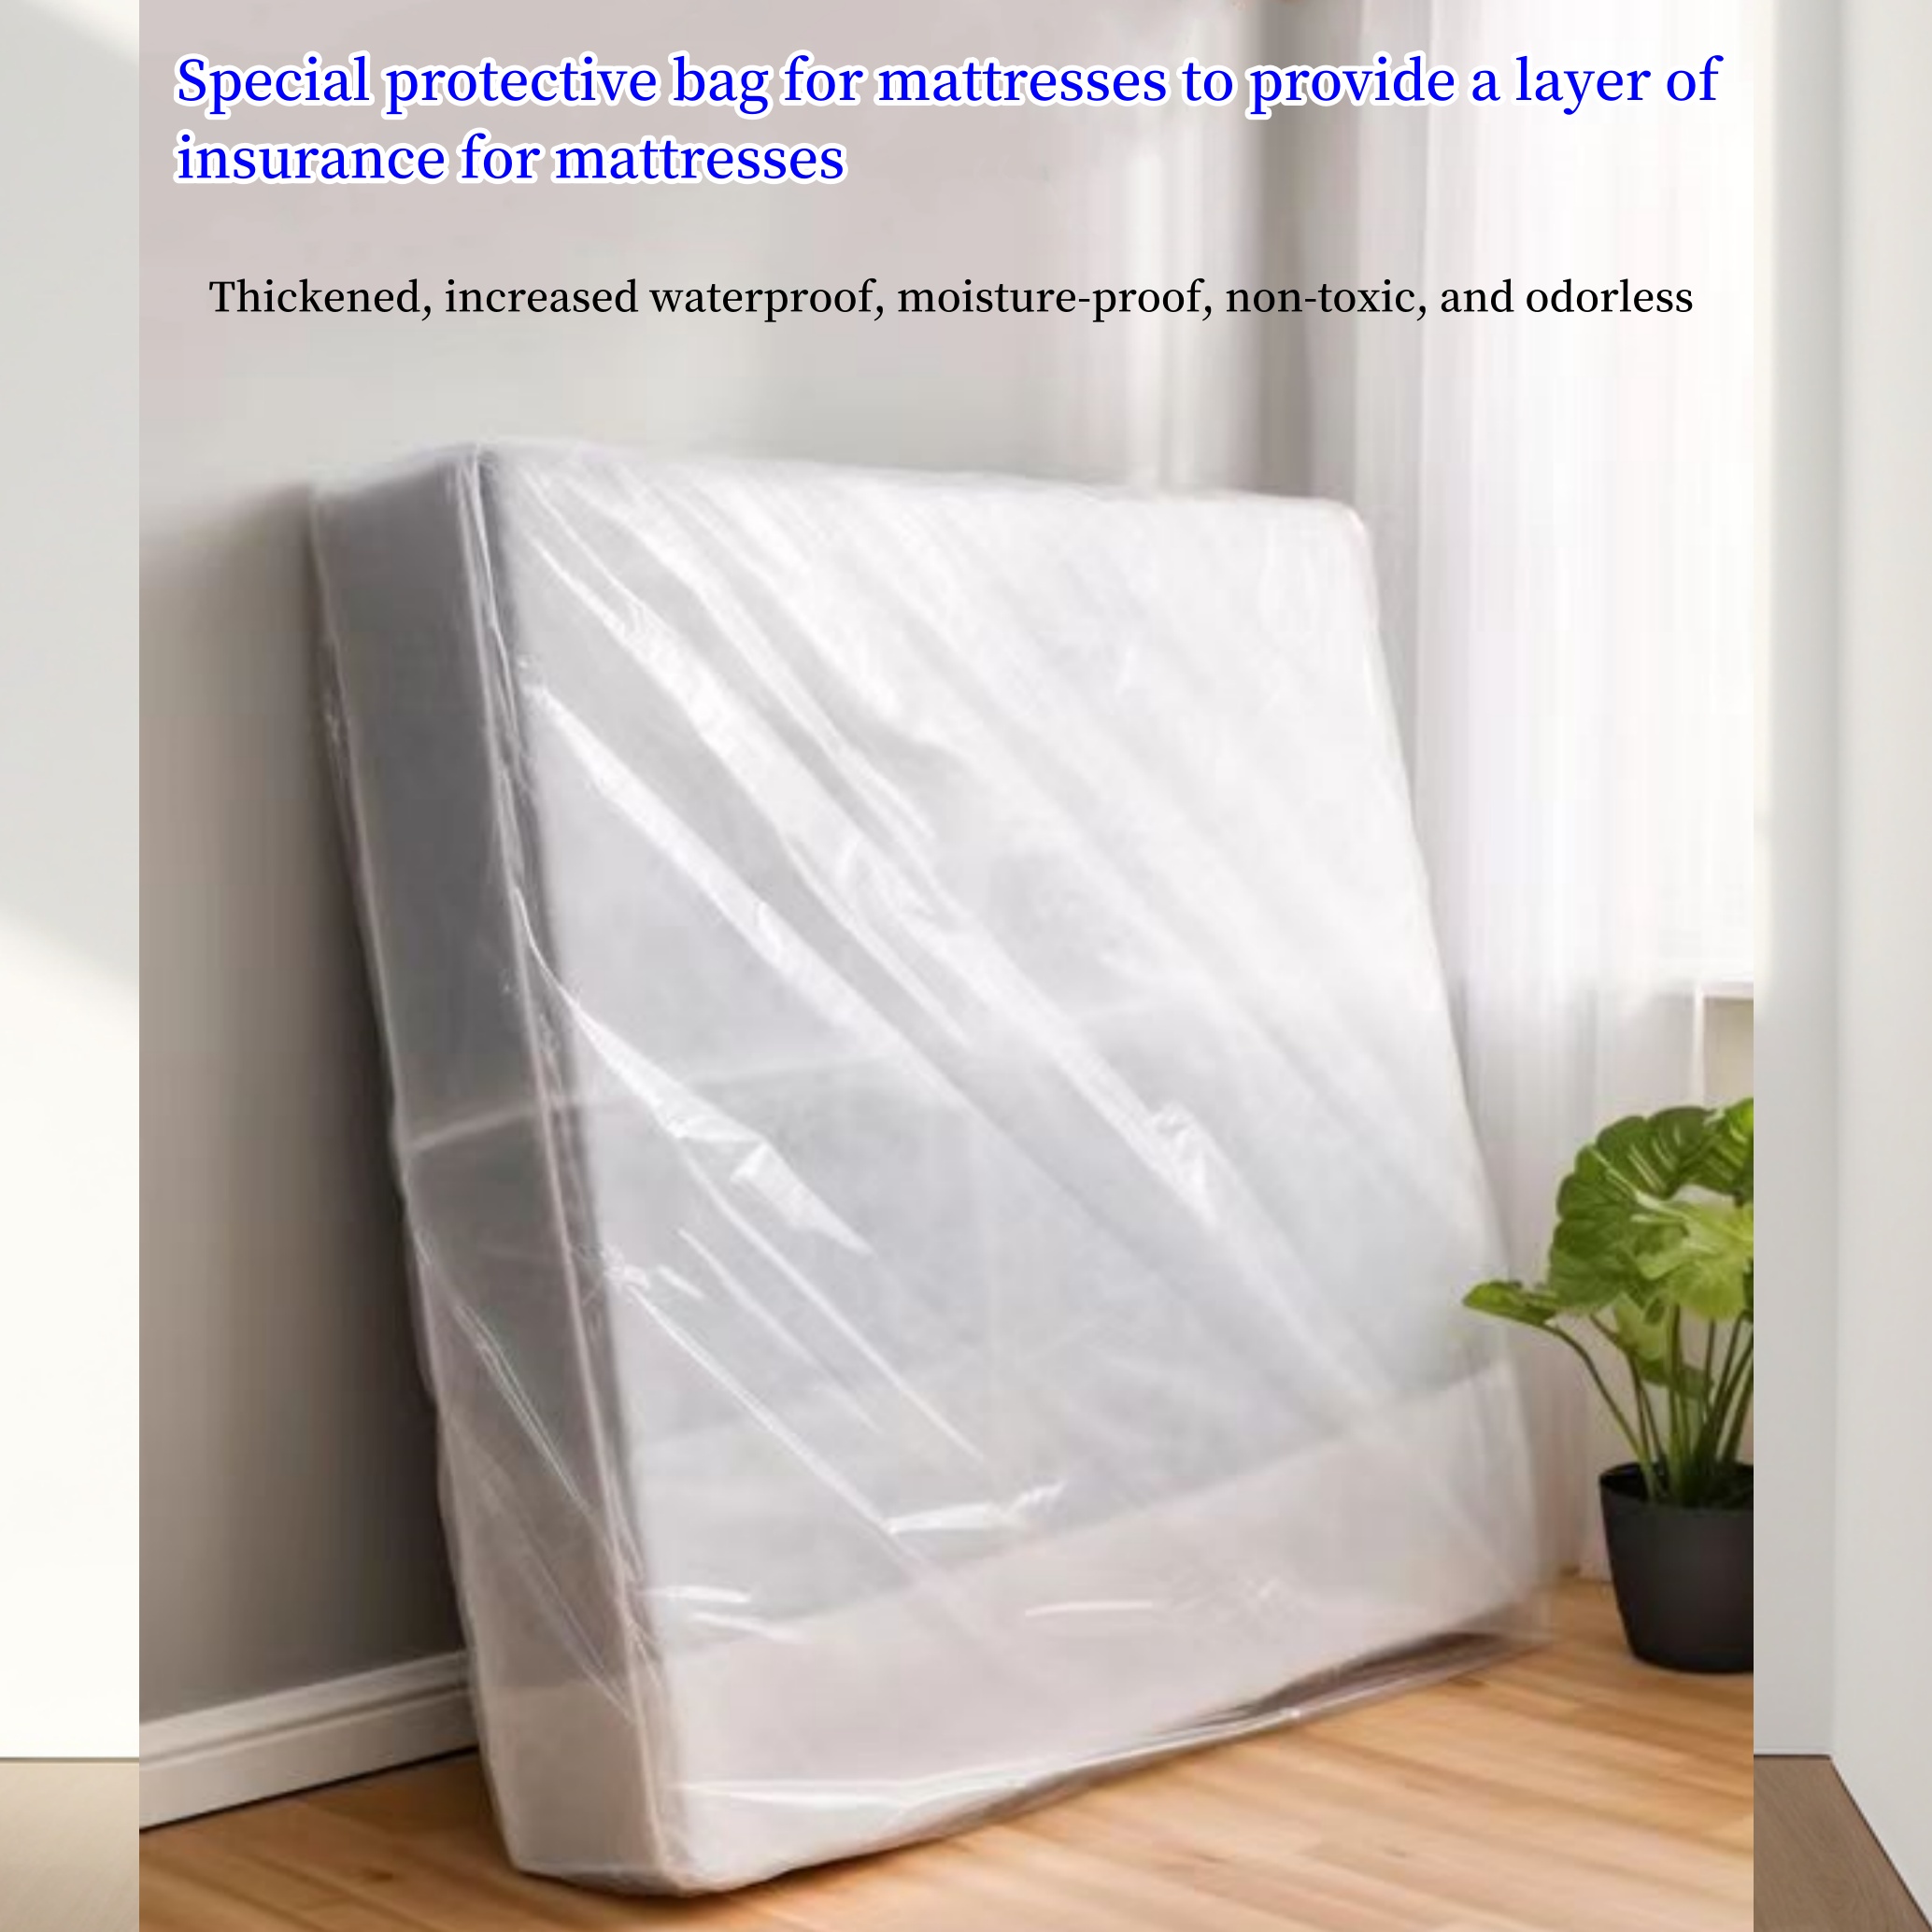 

Super Tensile Strength Mattress Protector Bag: Waterproof, Moisture Resistant, Non-toxic, And Odorless - Fits Mattresses Up To 200 X 240 X 35cm